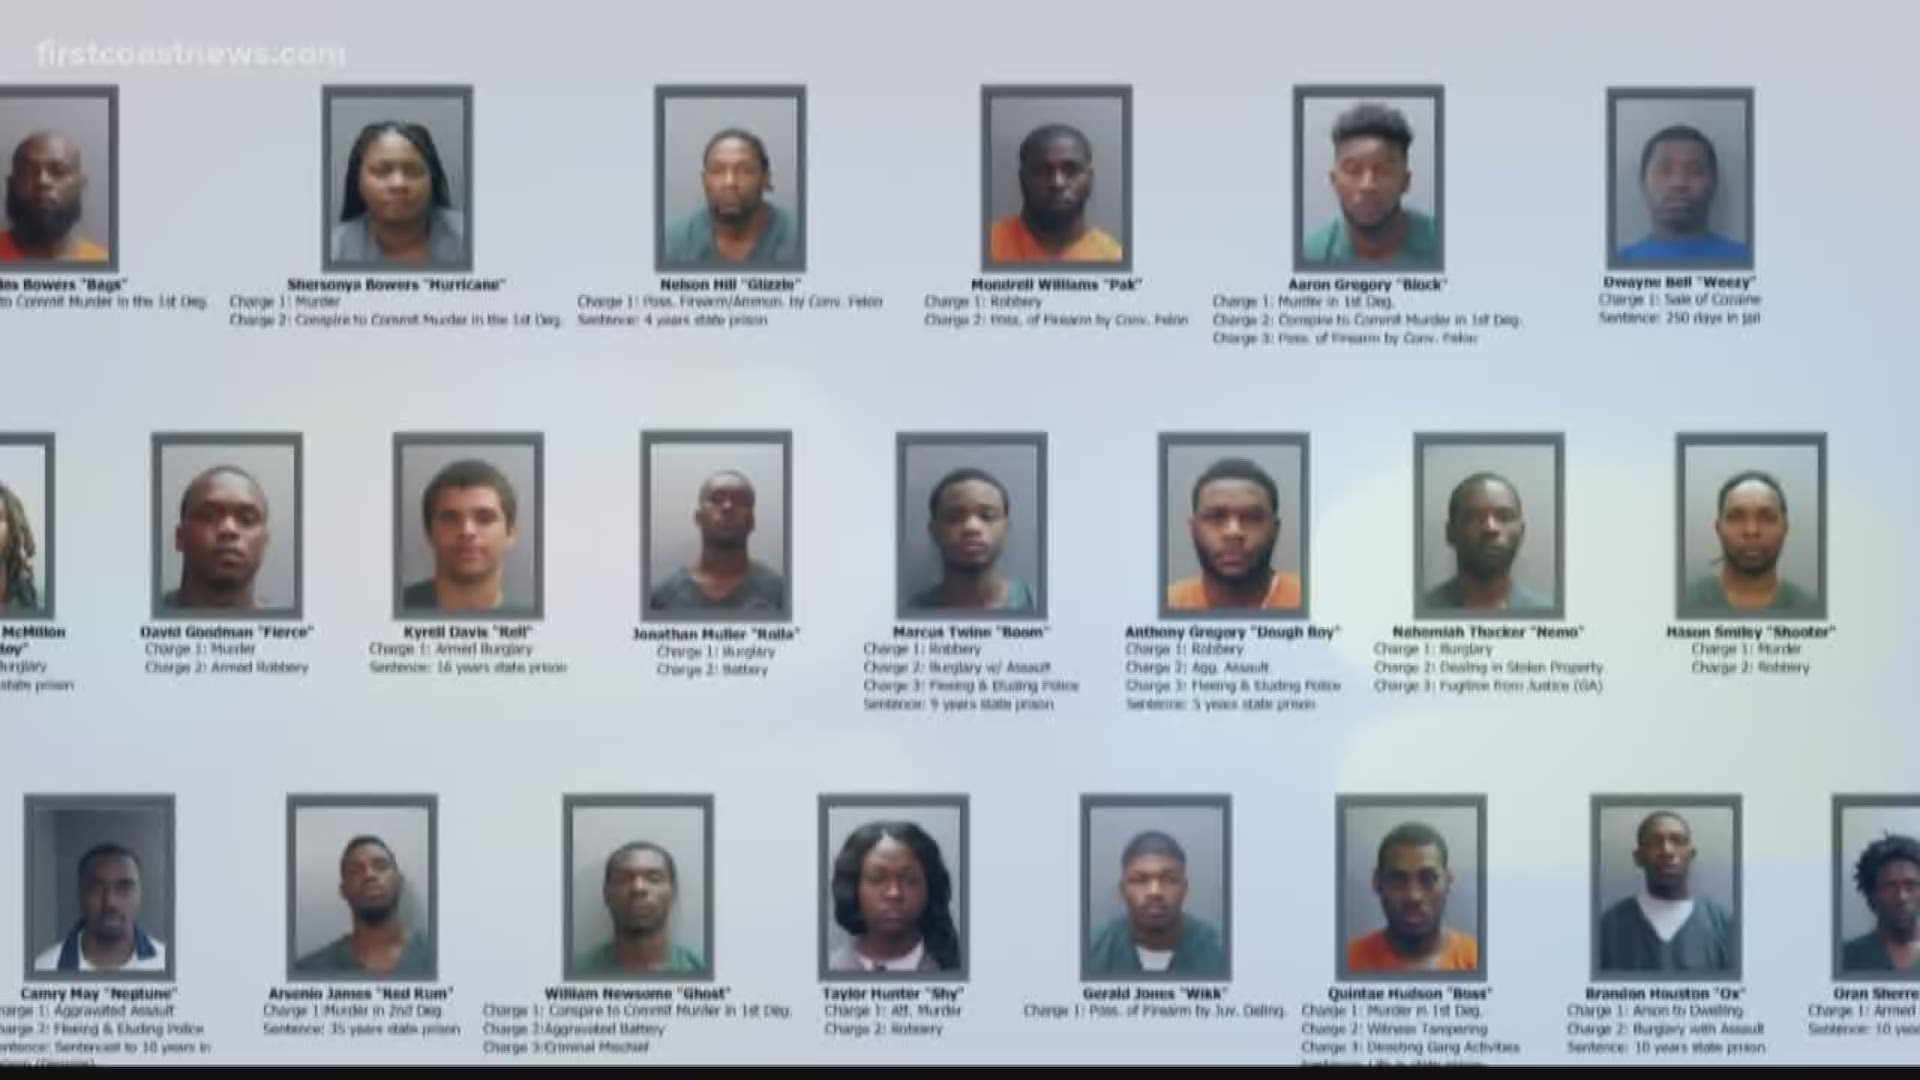 A total of 46 suspected gang members from a multi-state gang called the Rollin' 20s were arrested in Jacksonville following a two-phase investigation, the Jacksonville Sheriff's Office announced Friday.